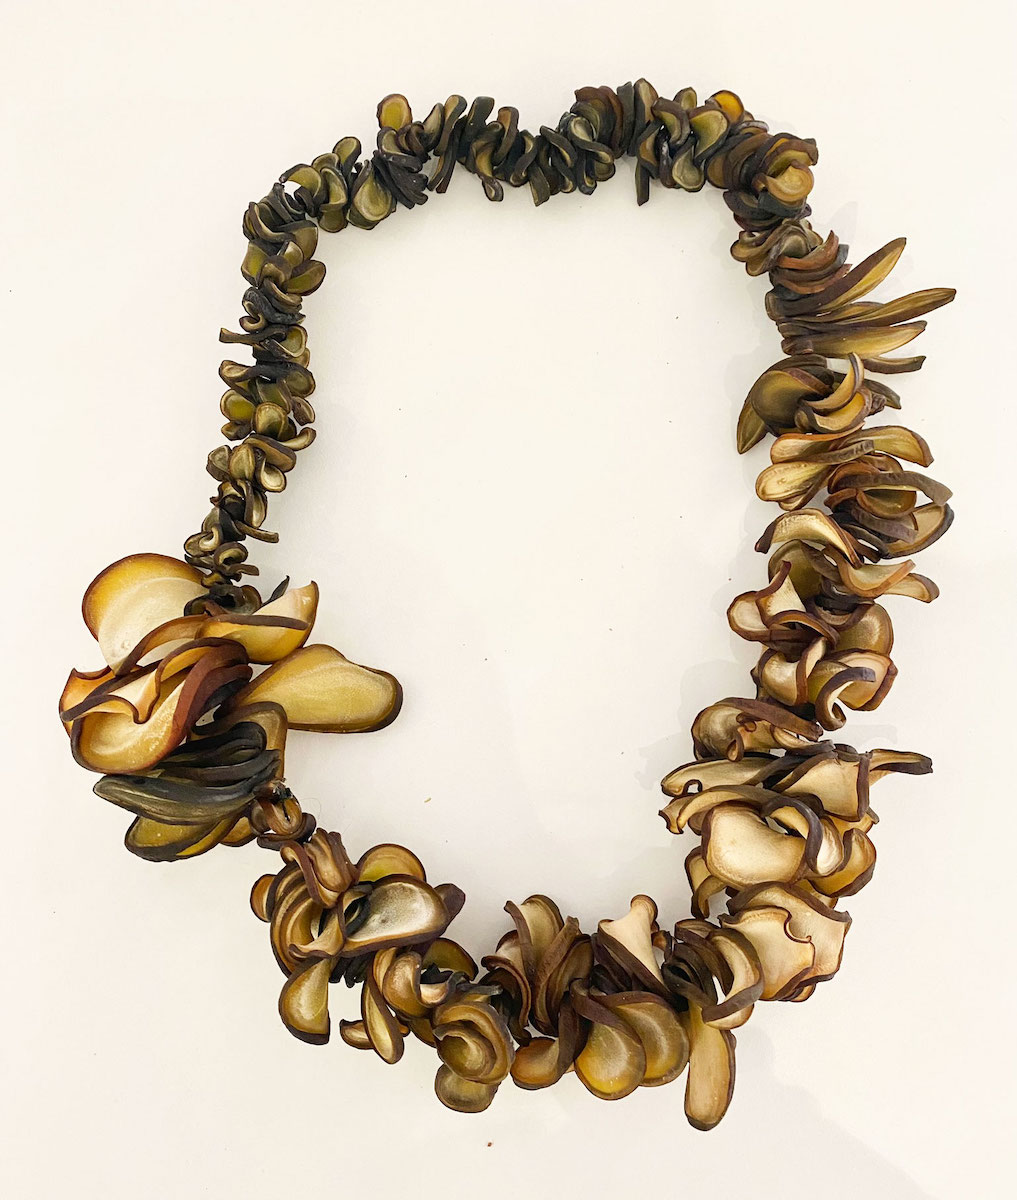 Bulky necklace made from dried pieces of kelp stalk of various shapes